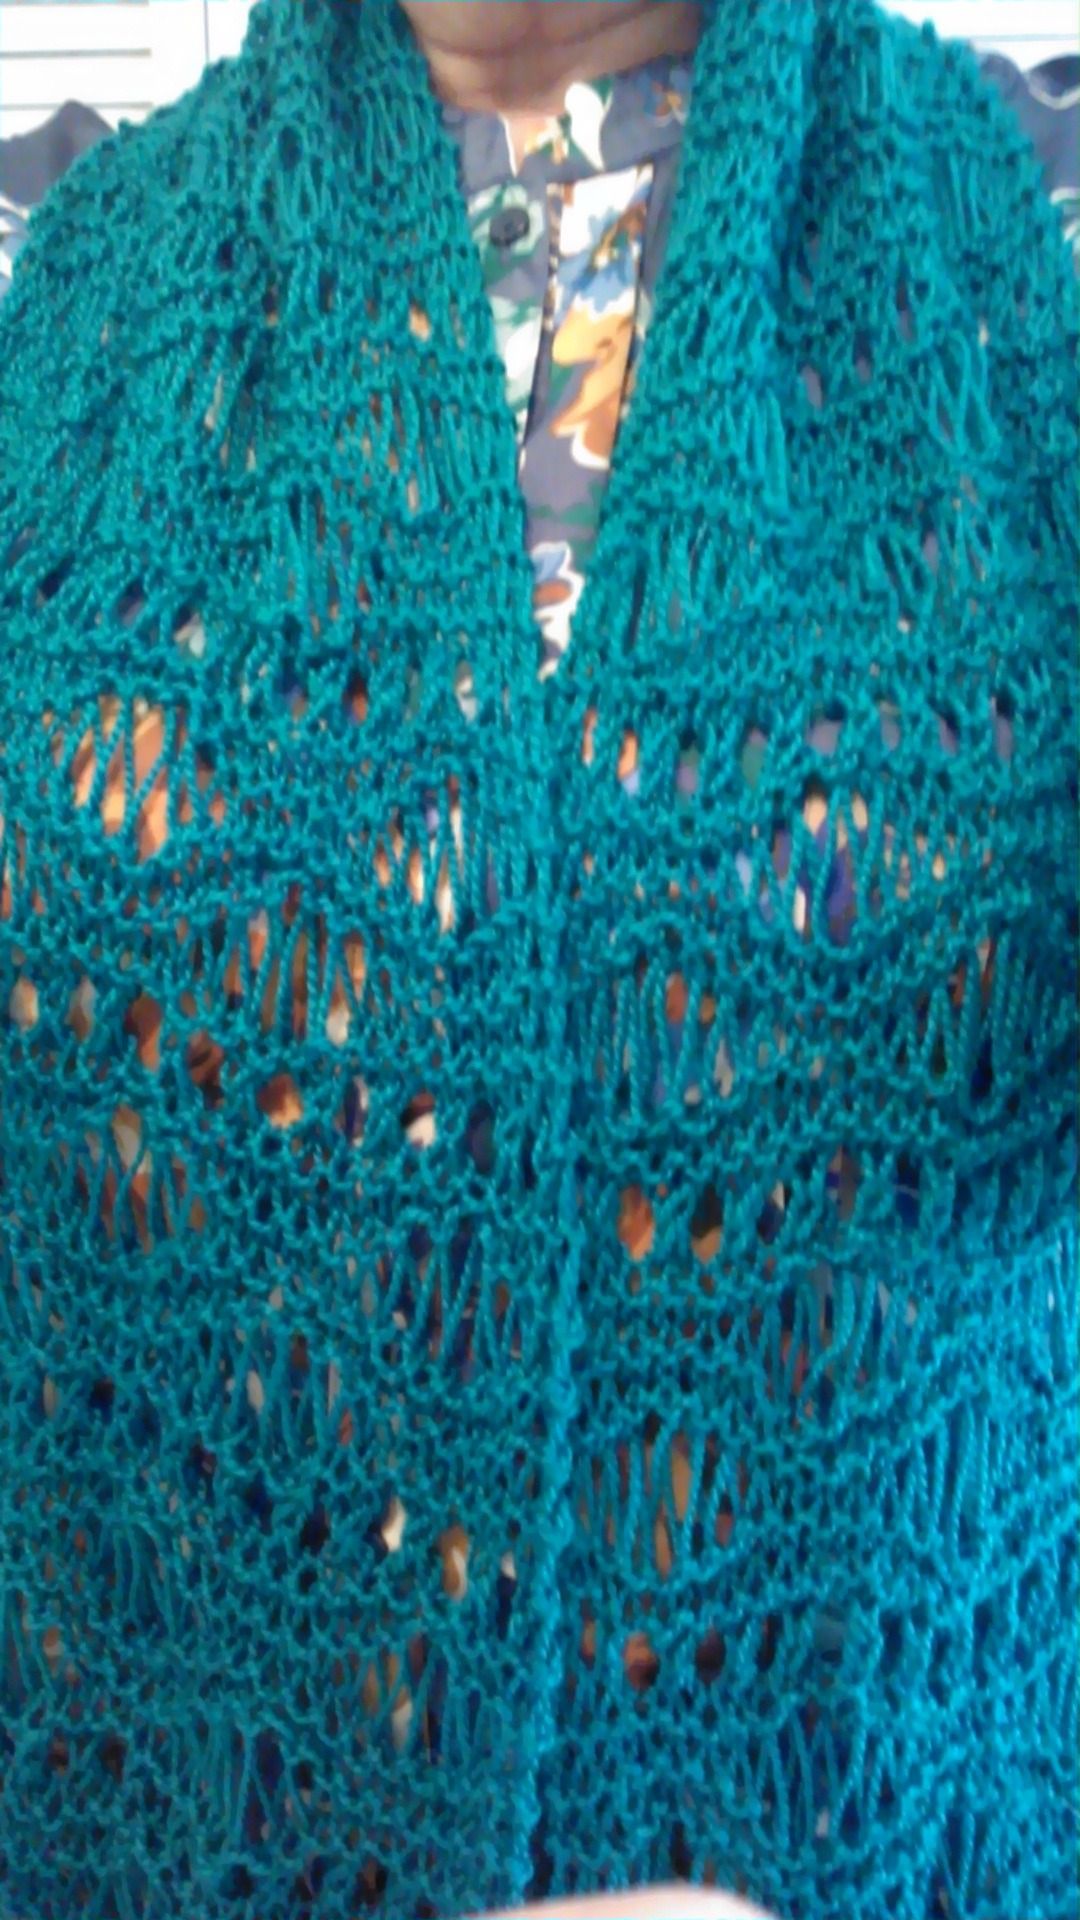 Lace & eyelets pattern on a summer scarf